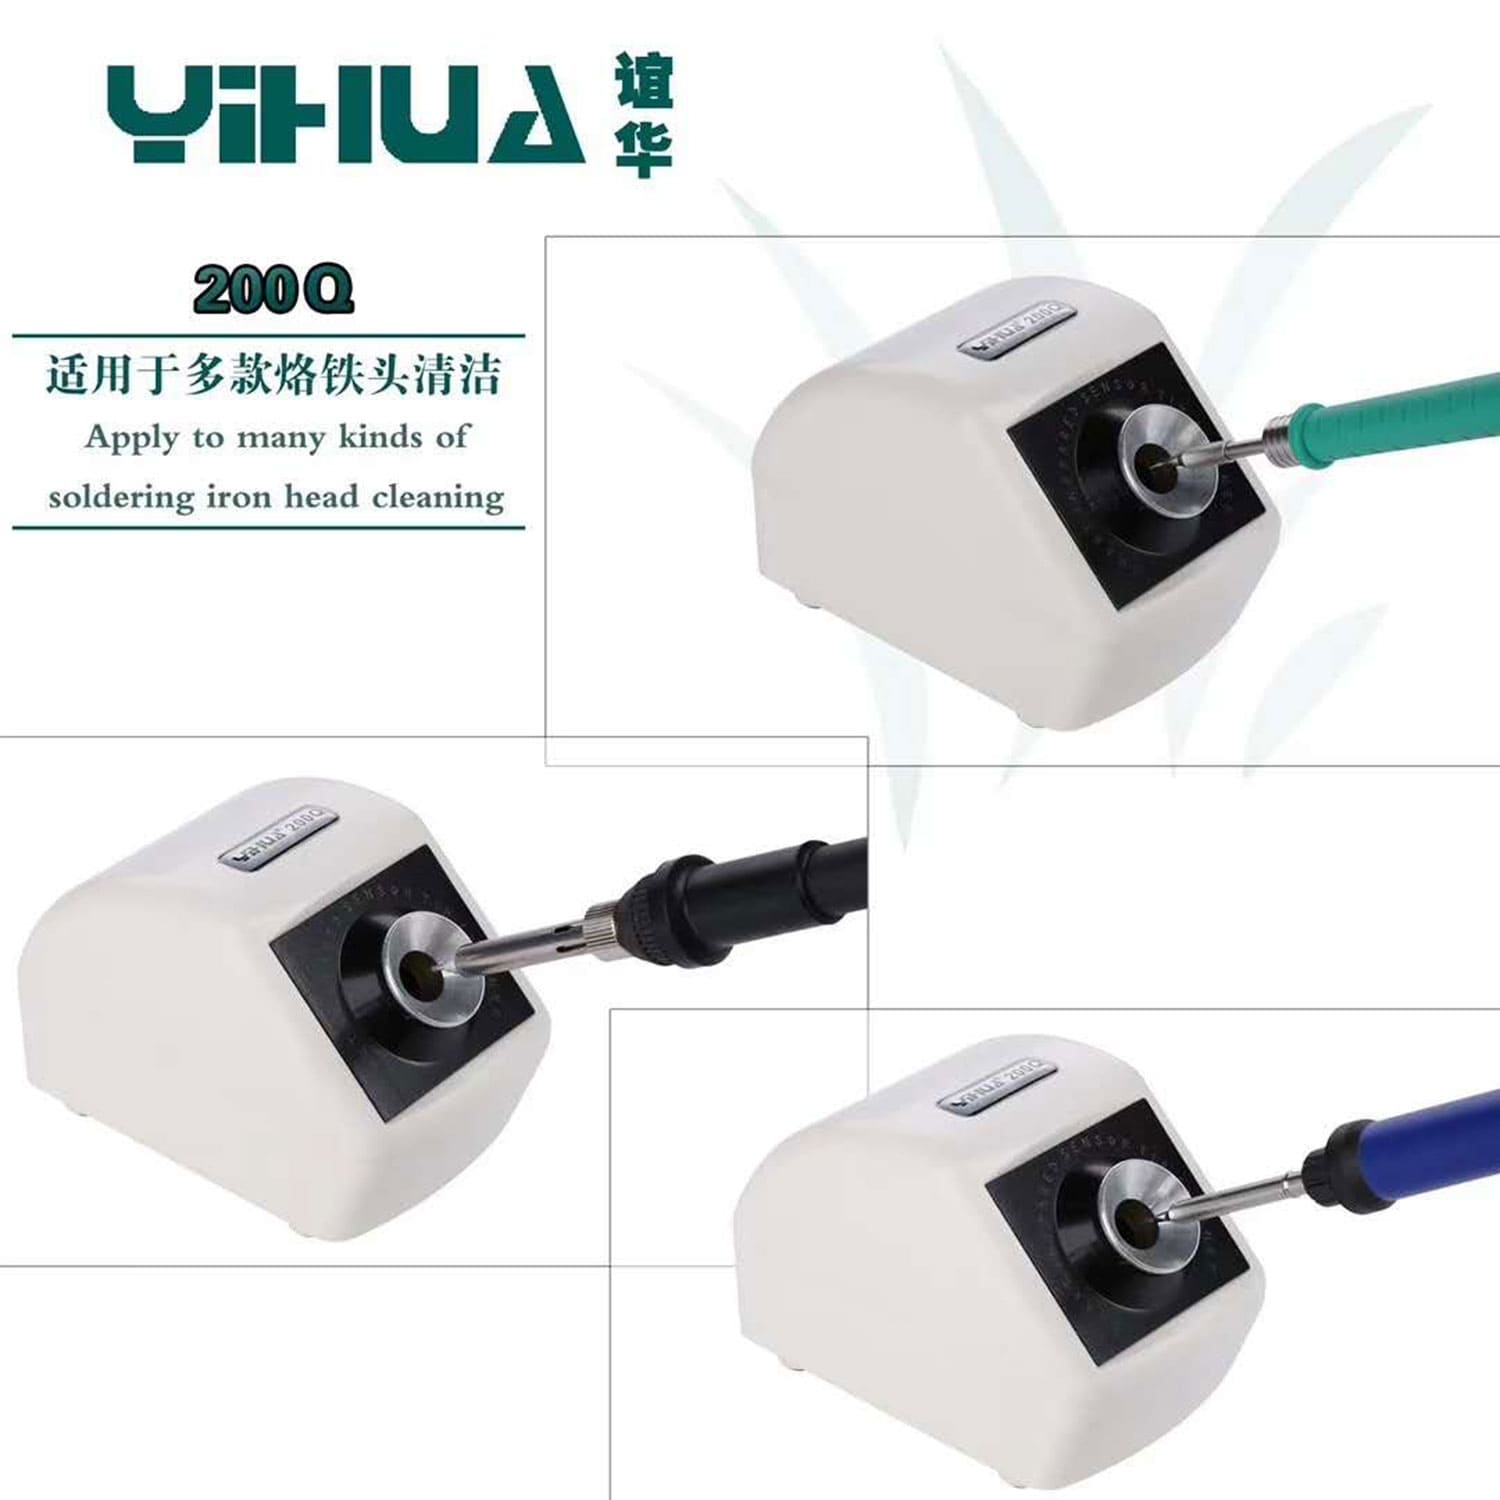 YIHUA 200Q INFRARED SENSOR SMART INDUCTION SOLDERING IRON TIP CLEANER